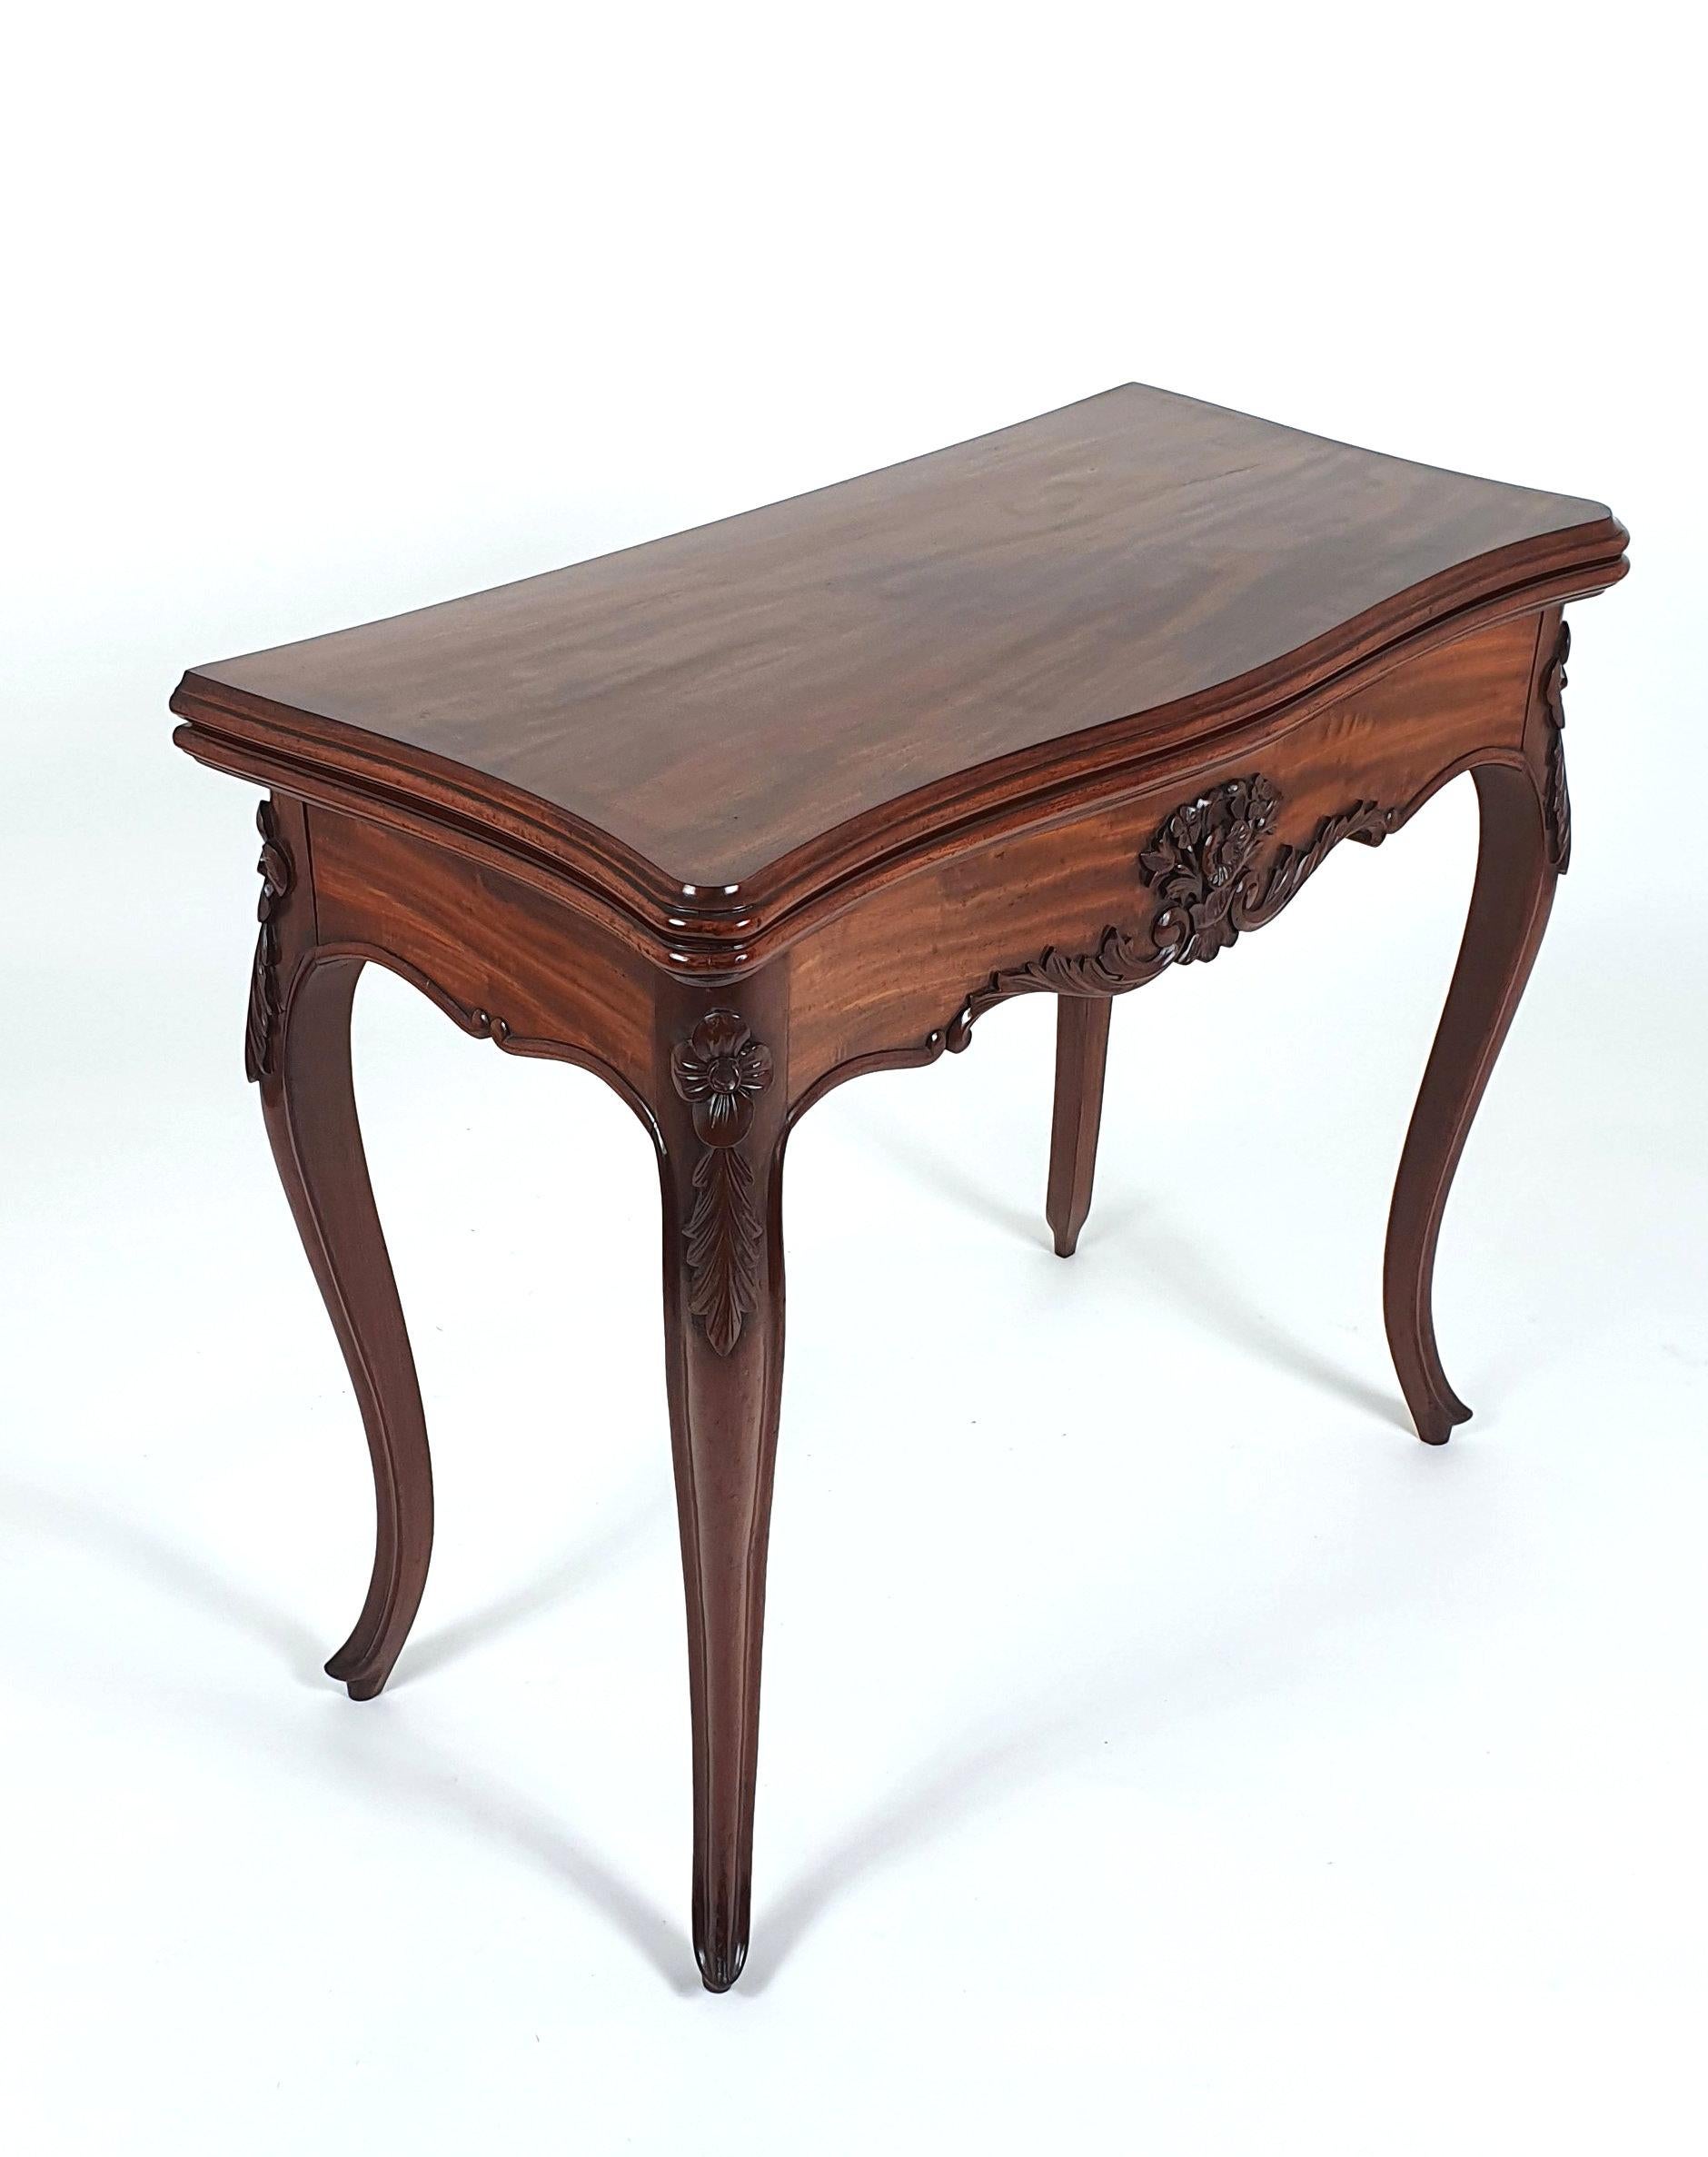 19th Century French Figured Mahogany Fold-Over Card Table In Good Condition For Sale In London, west Sussex